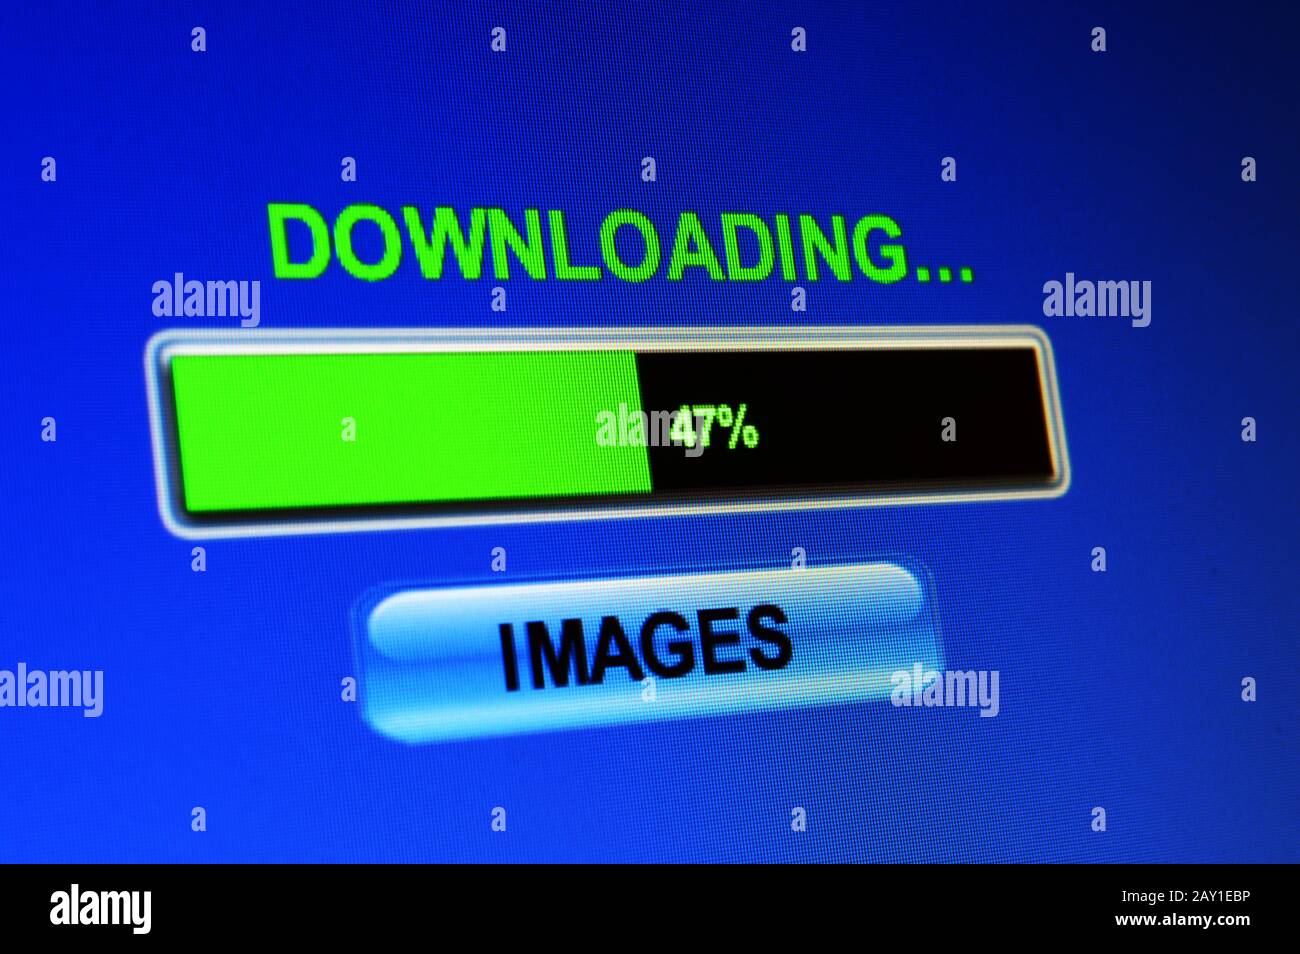 Download images Stock Photo